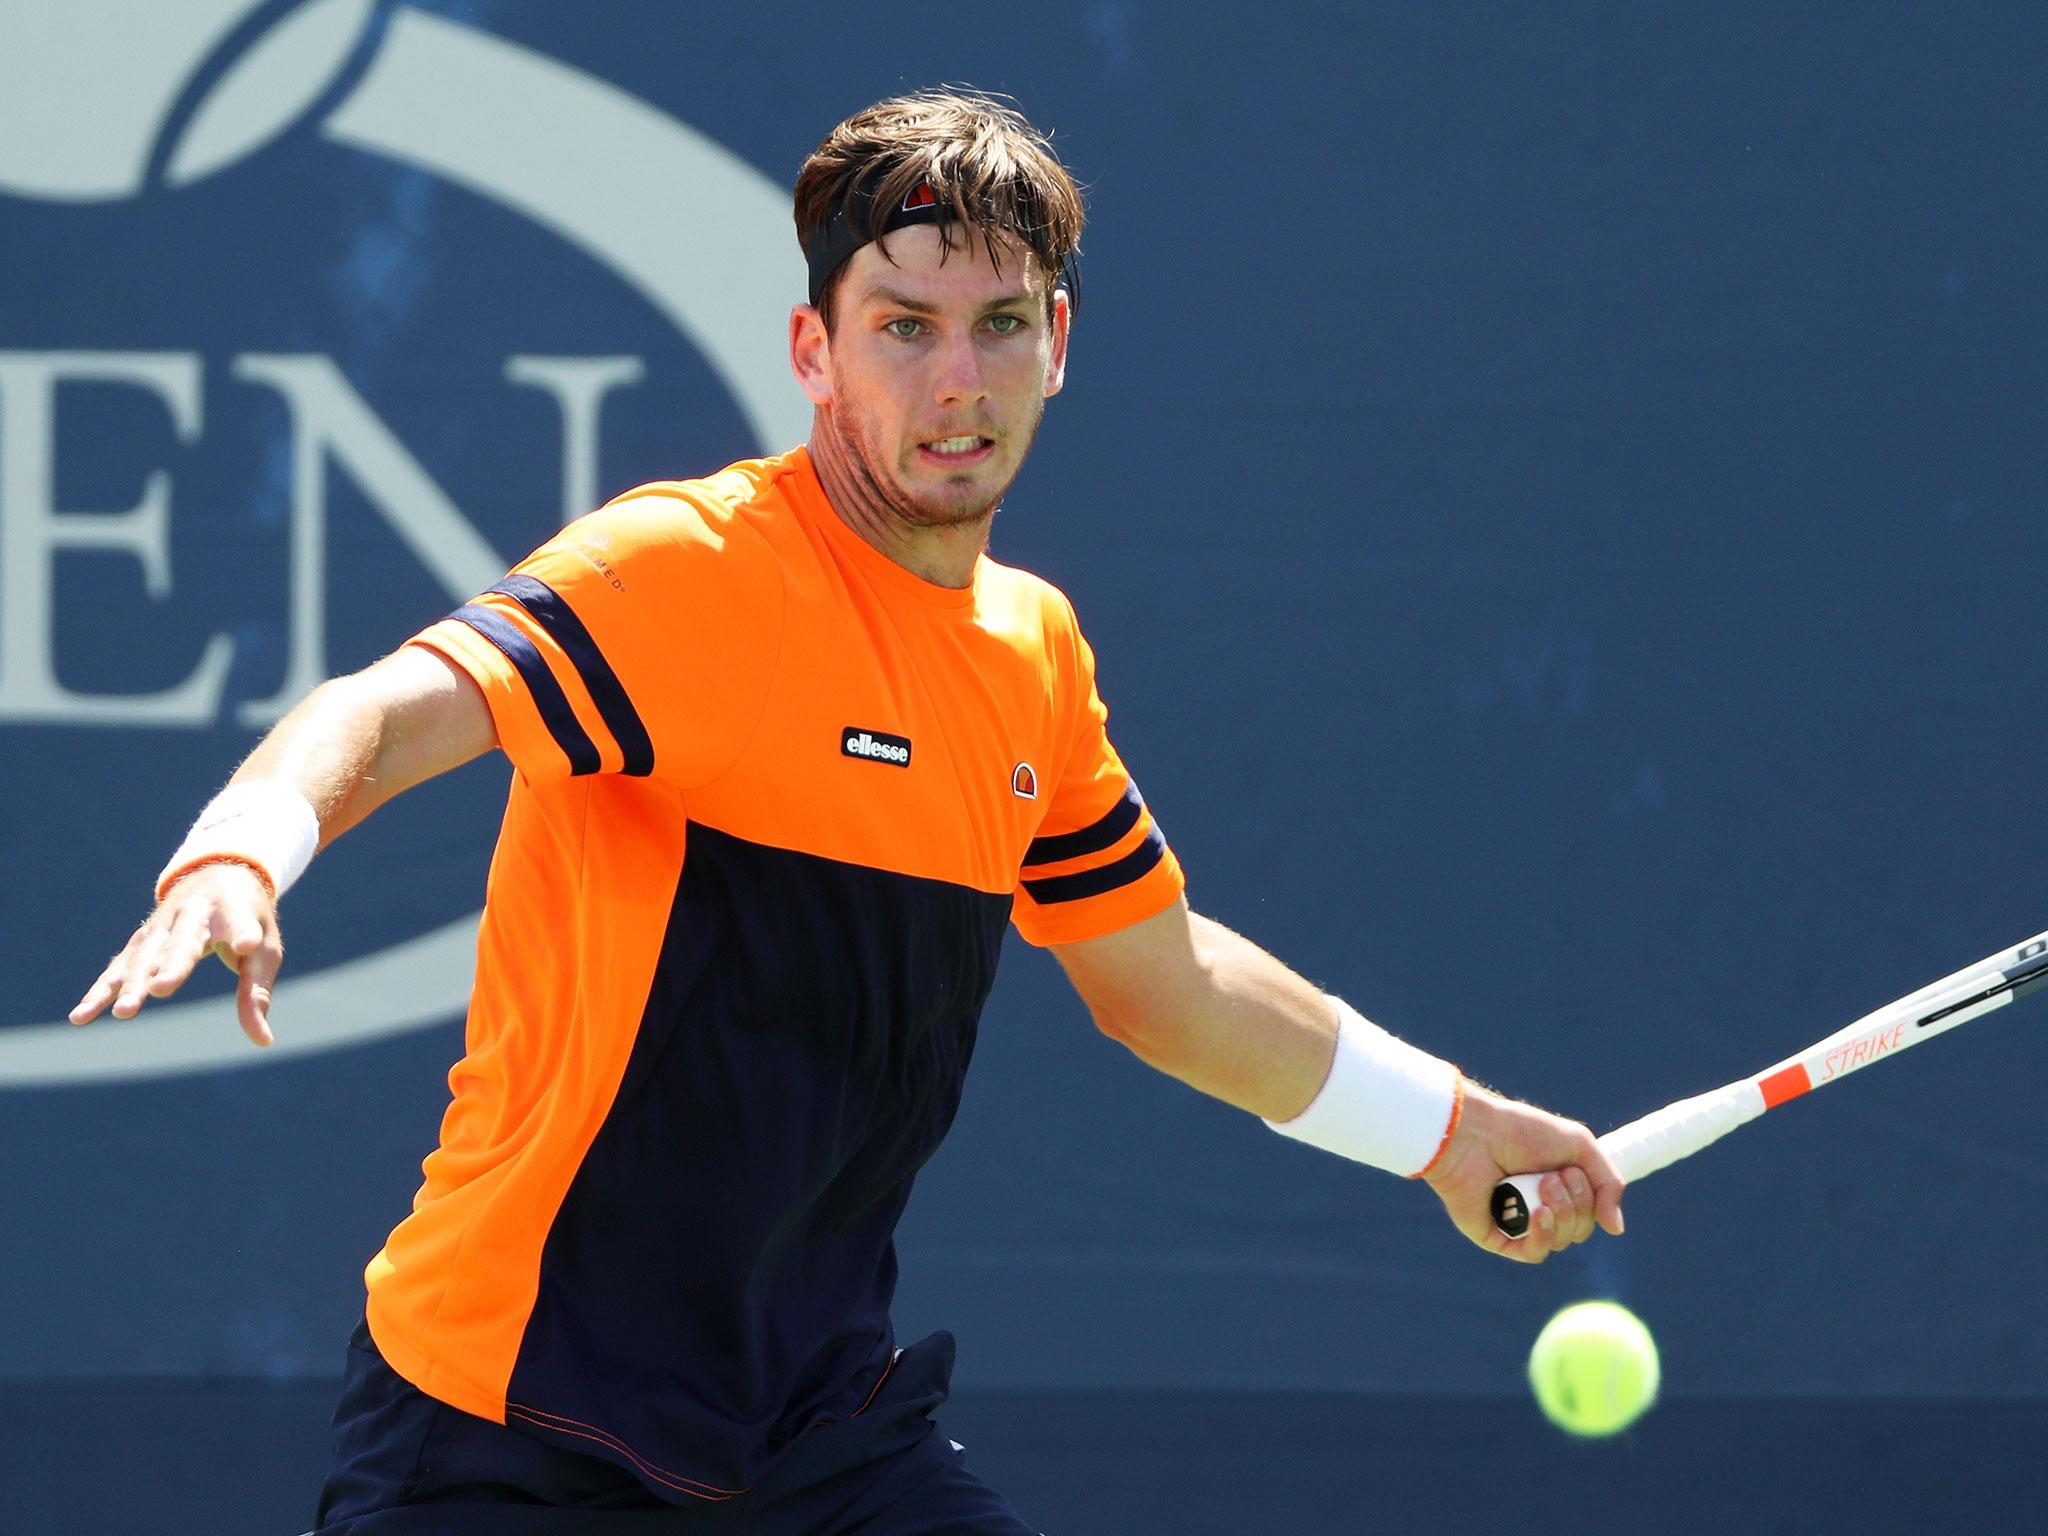 &#13;
Norrie is through to the second round after Dmitry Tursunov retired injured &#13;